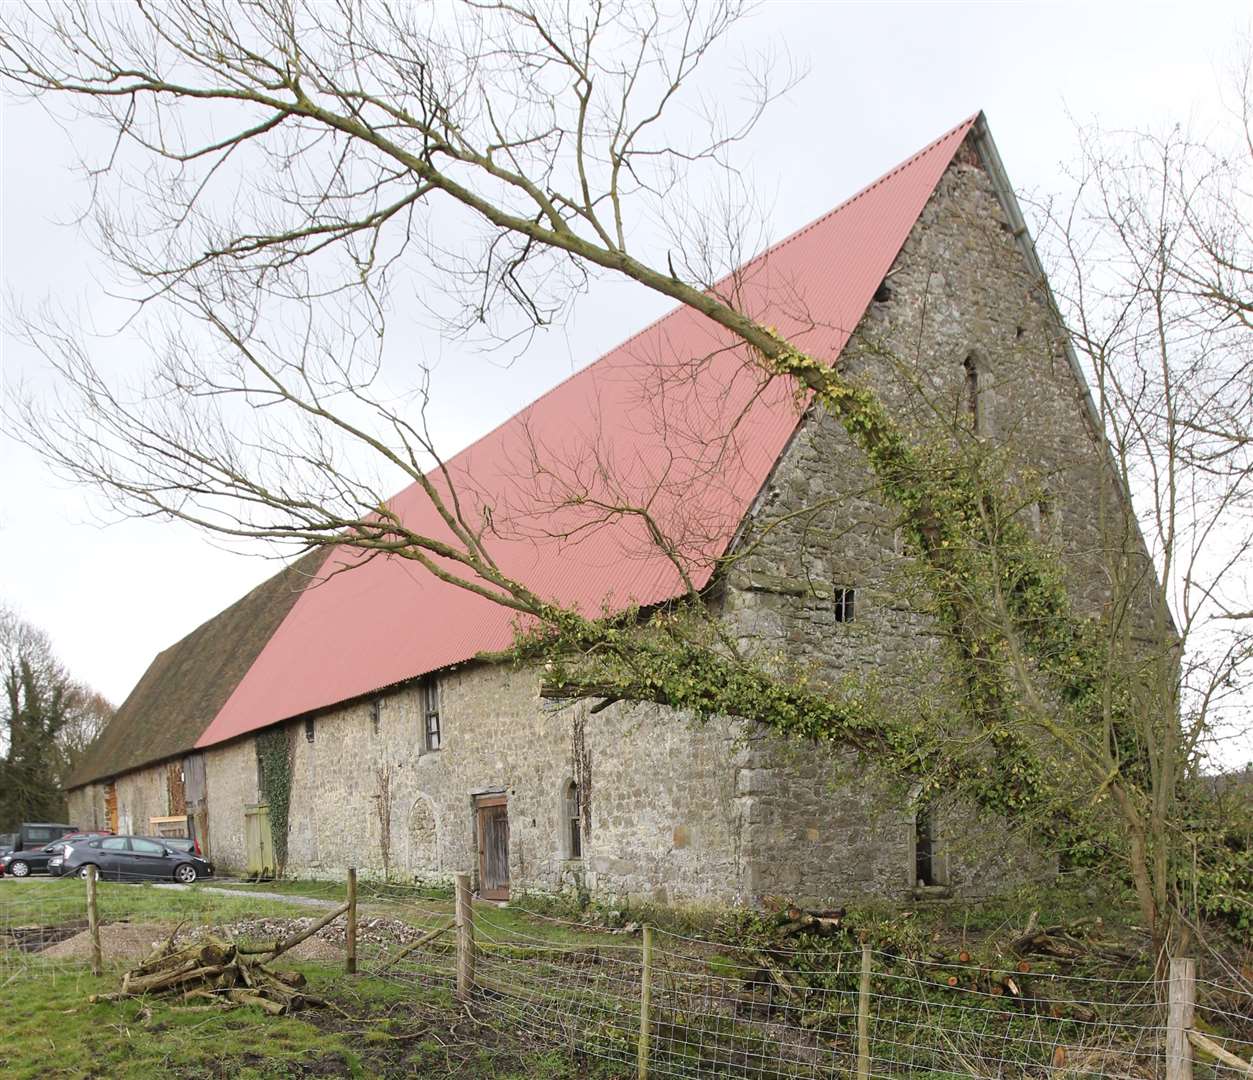 Boxley Abbey Barn in Sandling. Picture by: John Westhrop